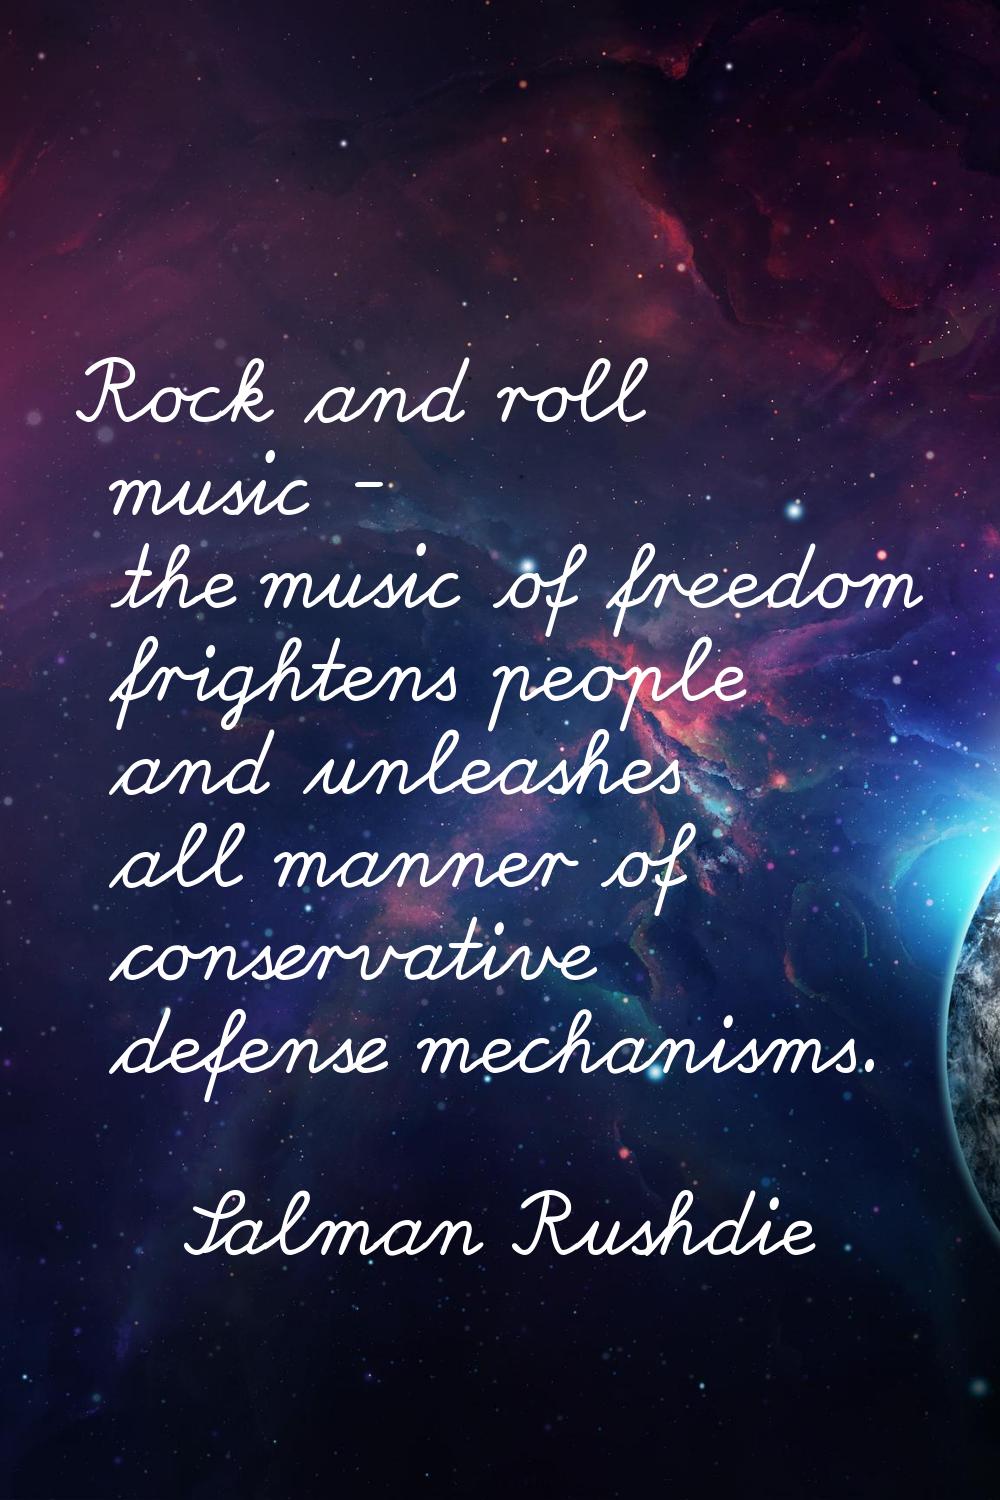 Rock and roll music - the music of freedom frightens people and unleashes all manner of conservativ